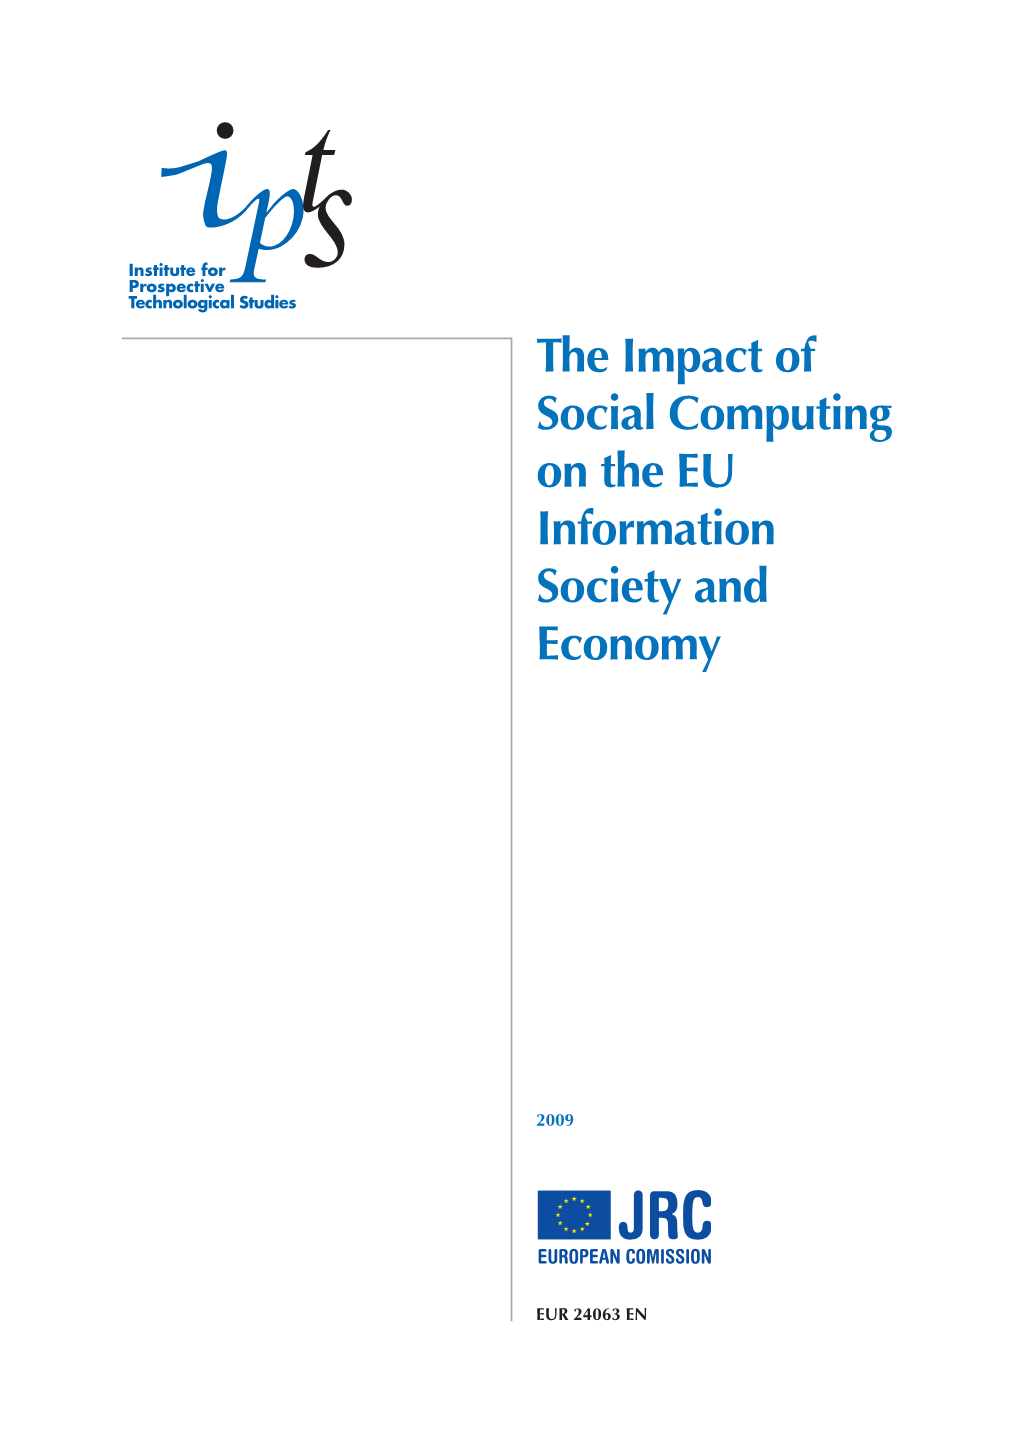 The Impact of Social Computing on the EU Information Society and Economy